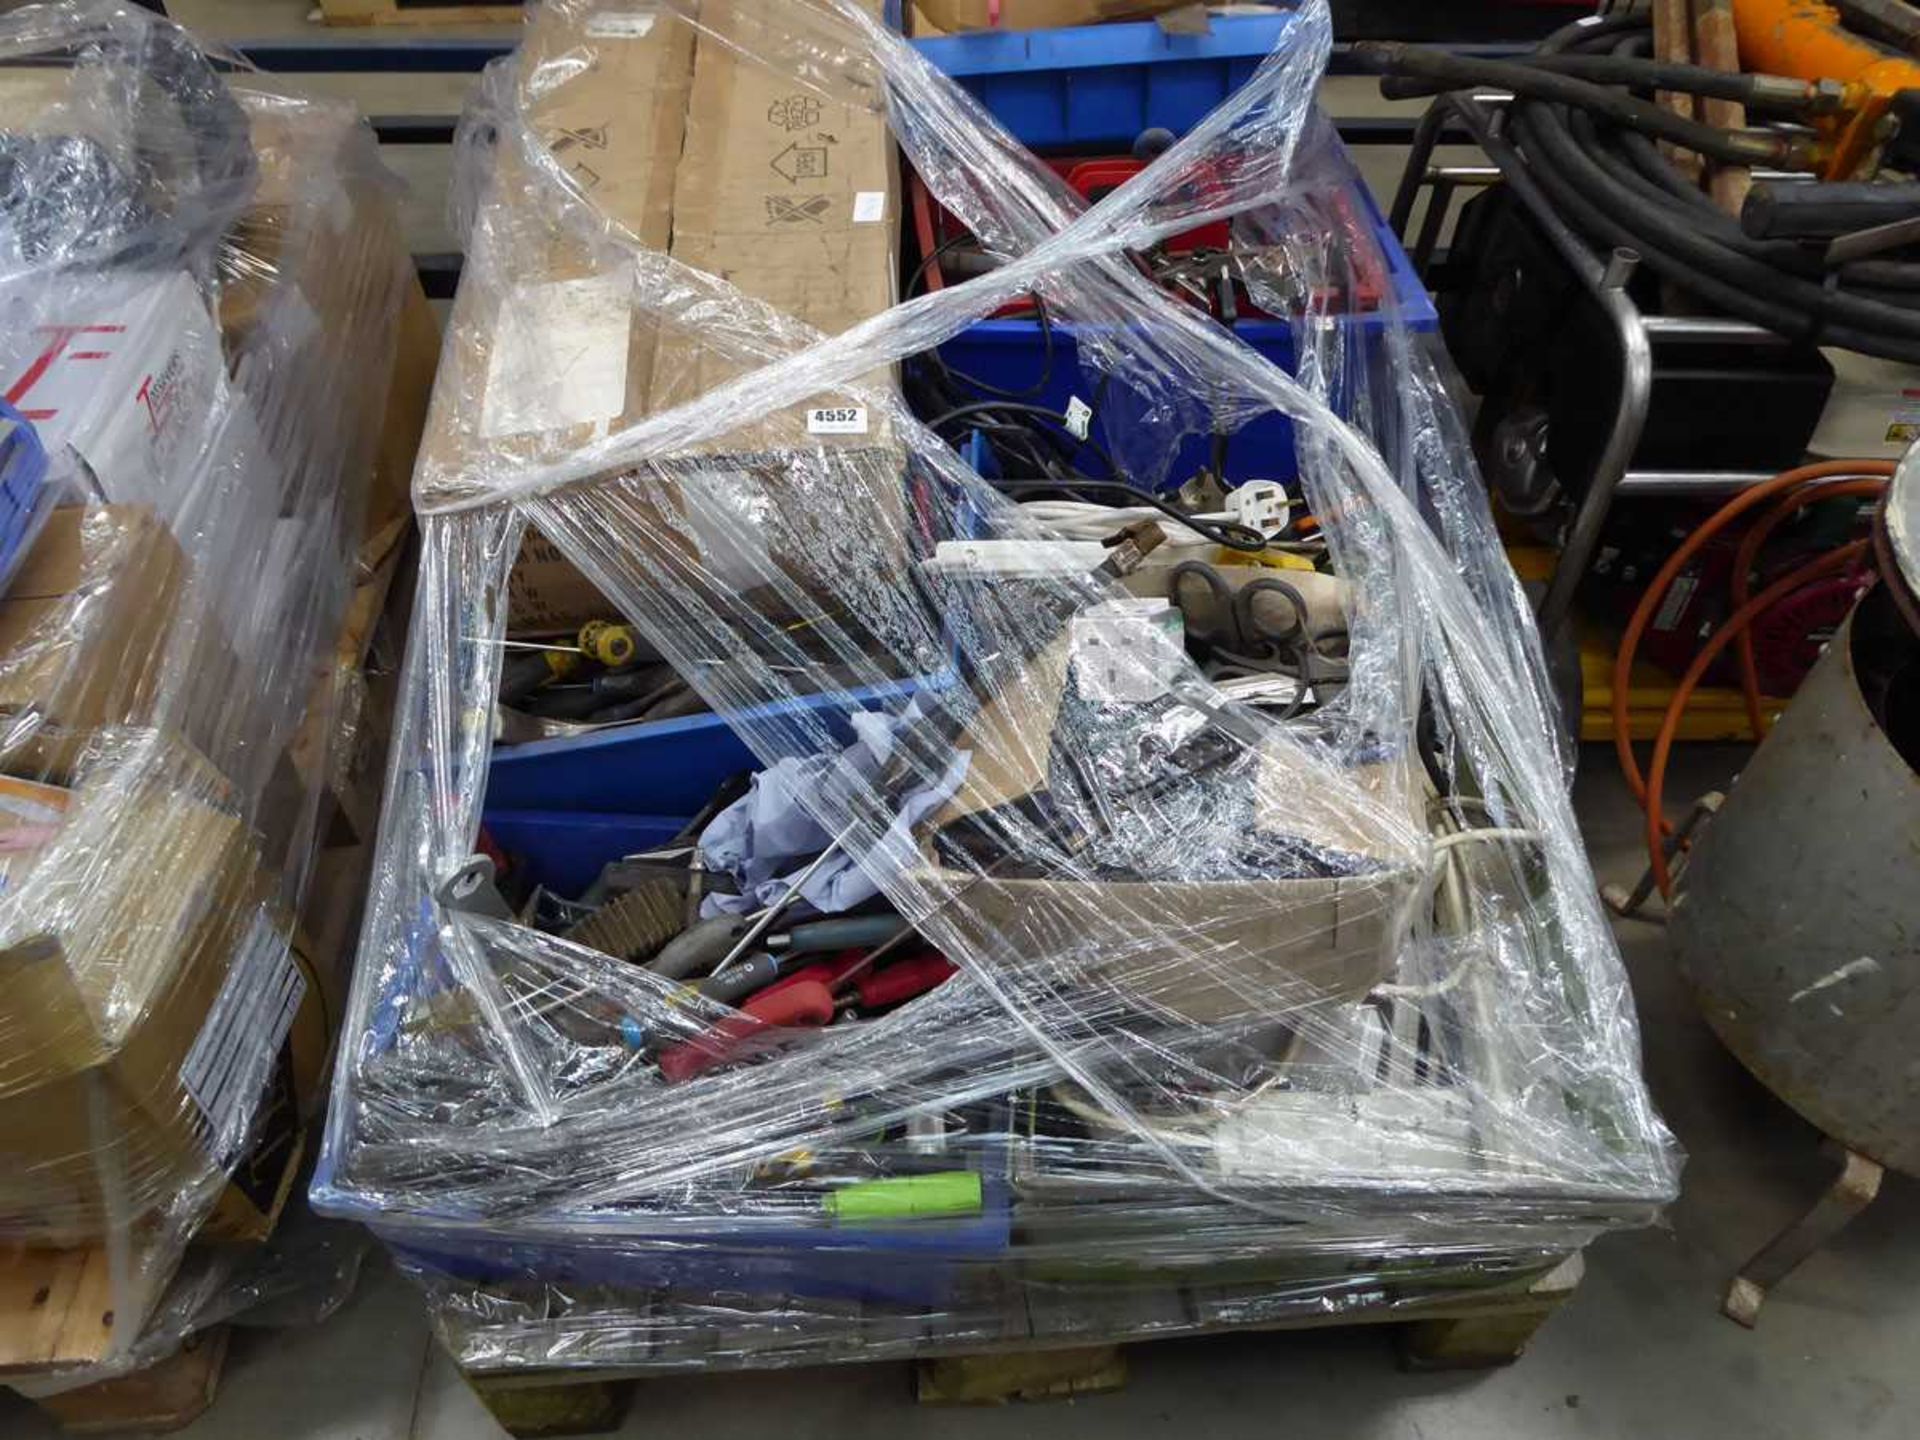 Pallet of assorted items including tools, extension cables, transformer, etc